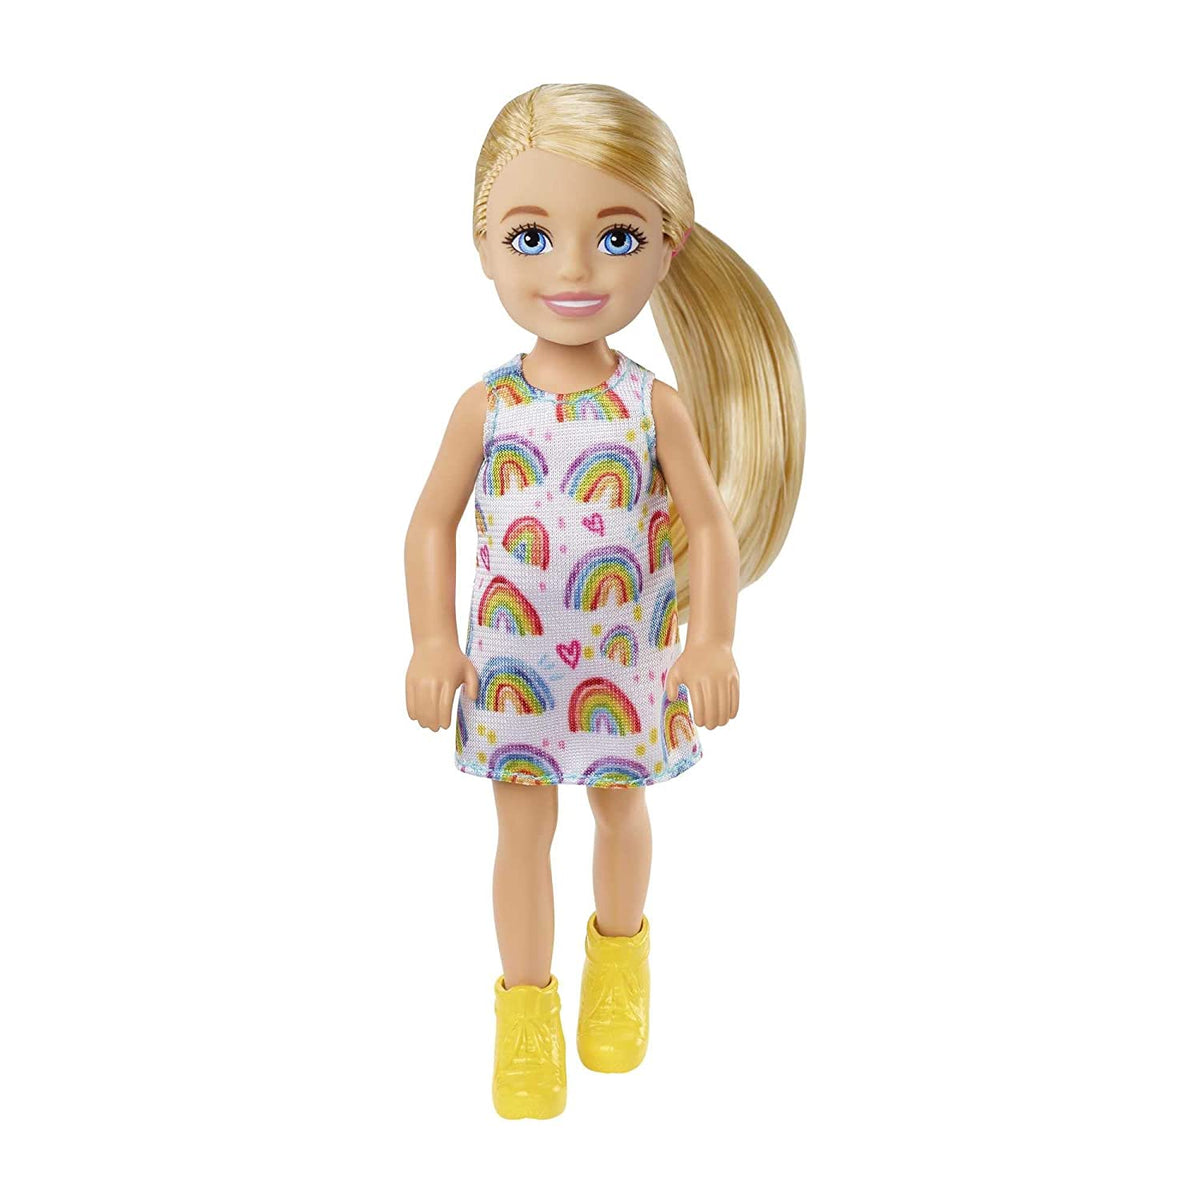 Barbie Chelsea 6 Inch Doll Blonde Hair Wearing Rainbow-Print Dress and Yellow Shoes for Kids Ages 3 Years Old & Up